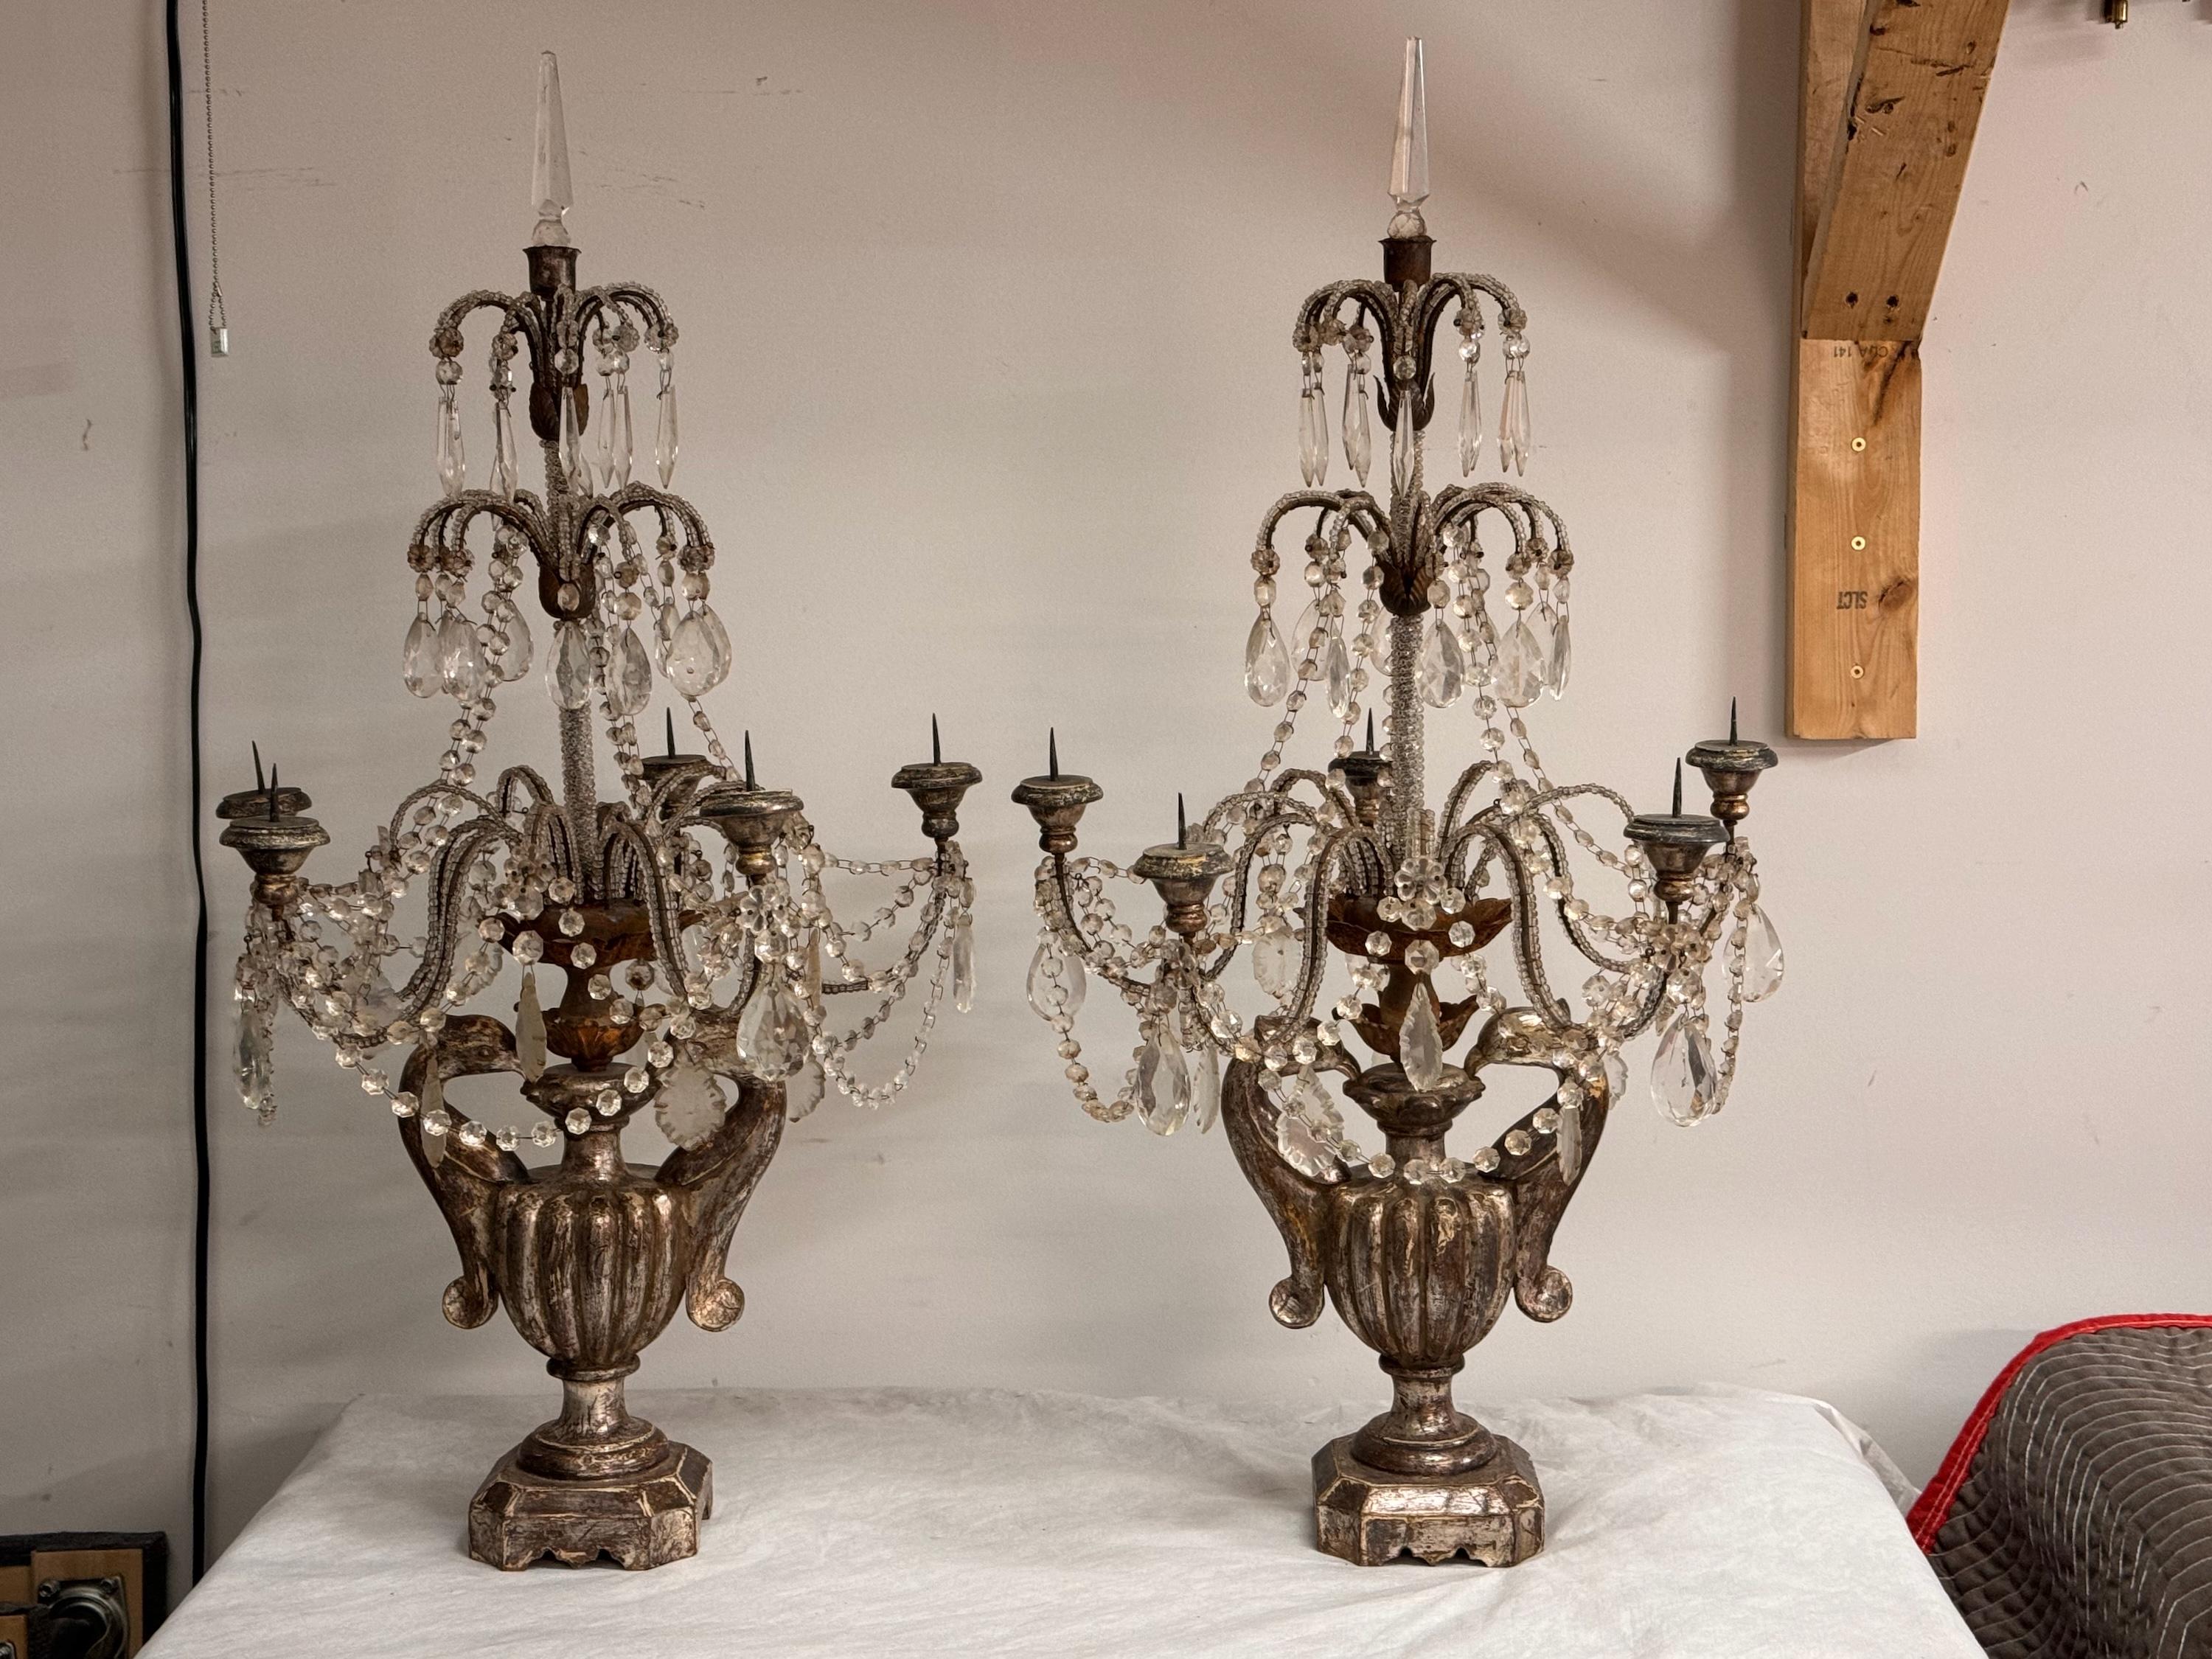 Here is an impressive pair of candelabra. Add a touch of elegance to your room.